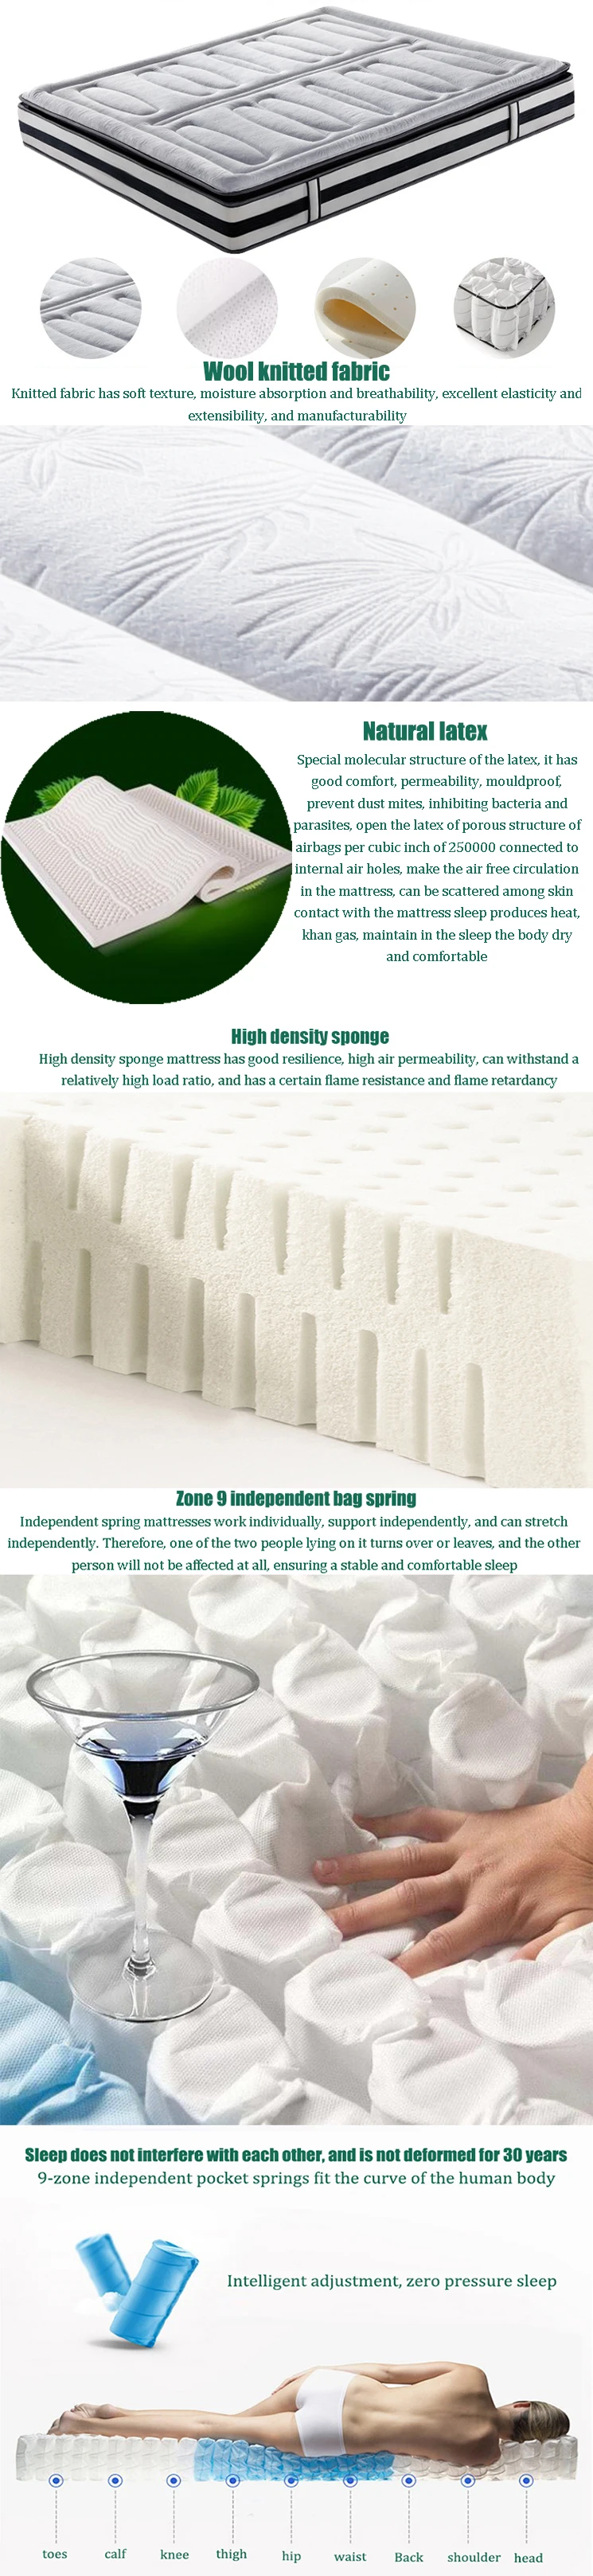 Organic Natural Latex Topper Foam In A Box Frame Bbl Roll Packed Spring Mattress